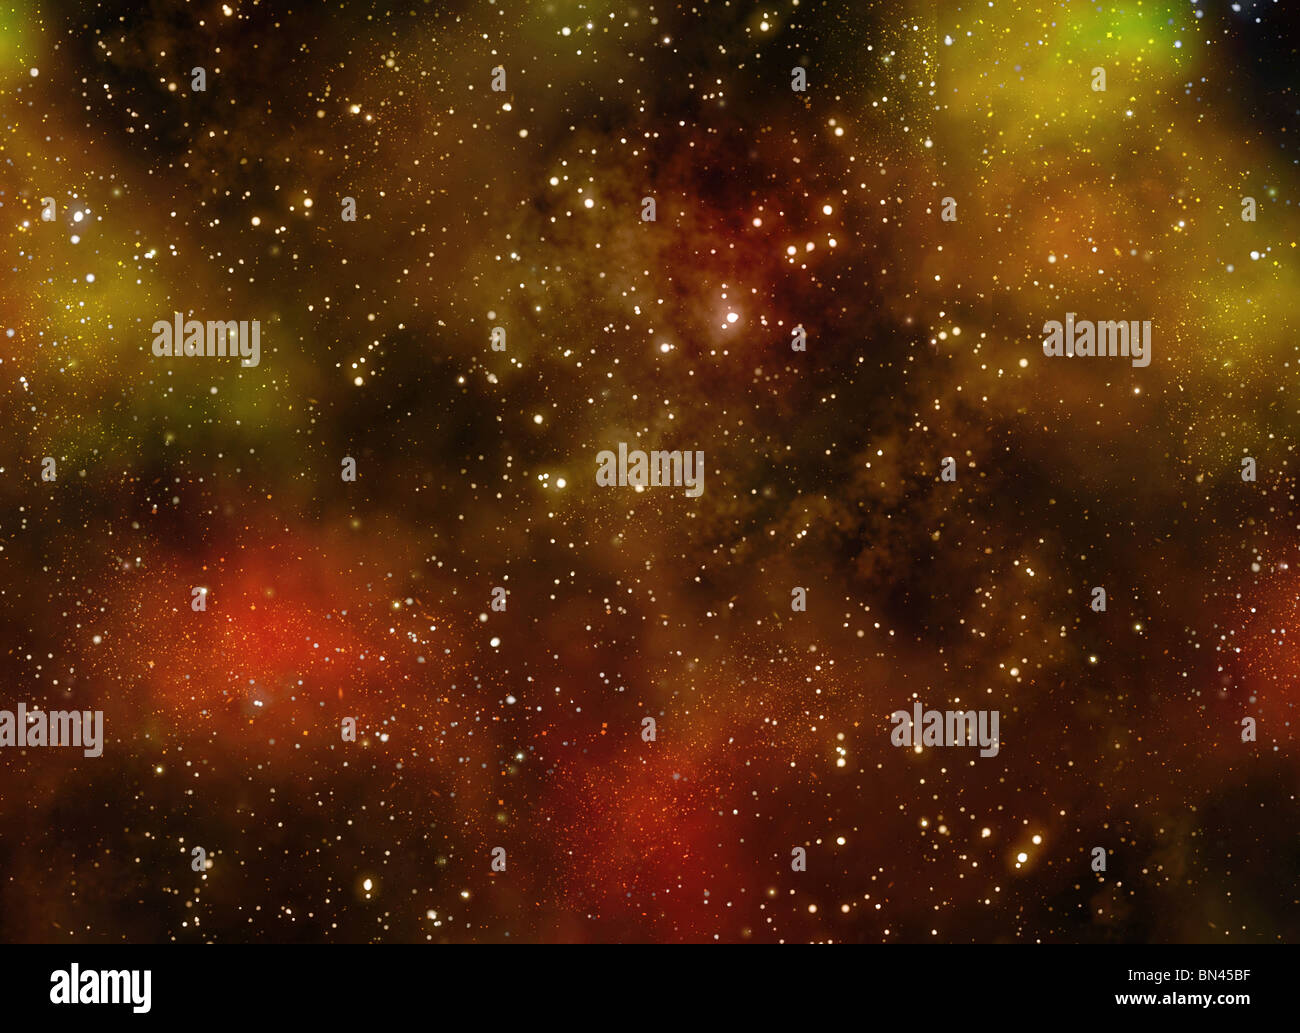 deep outer space background with stars and nebula Stock Photo